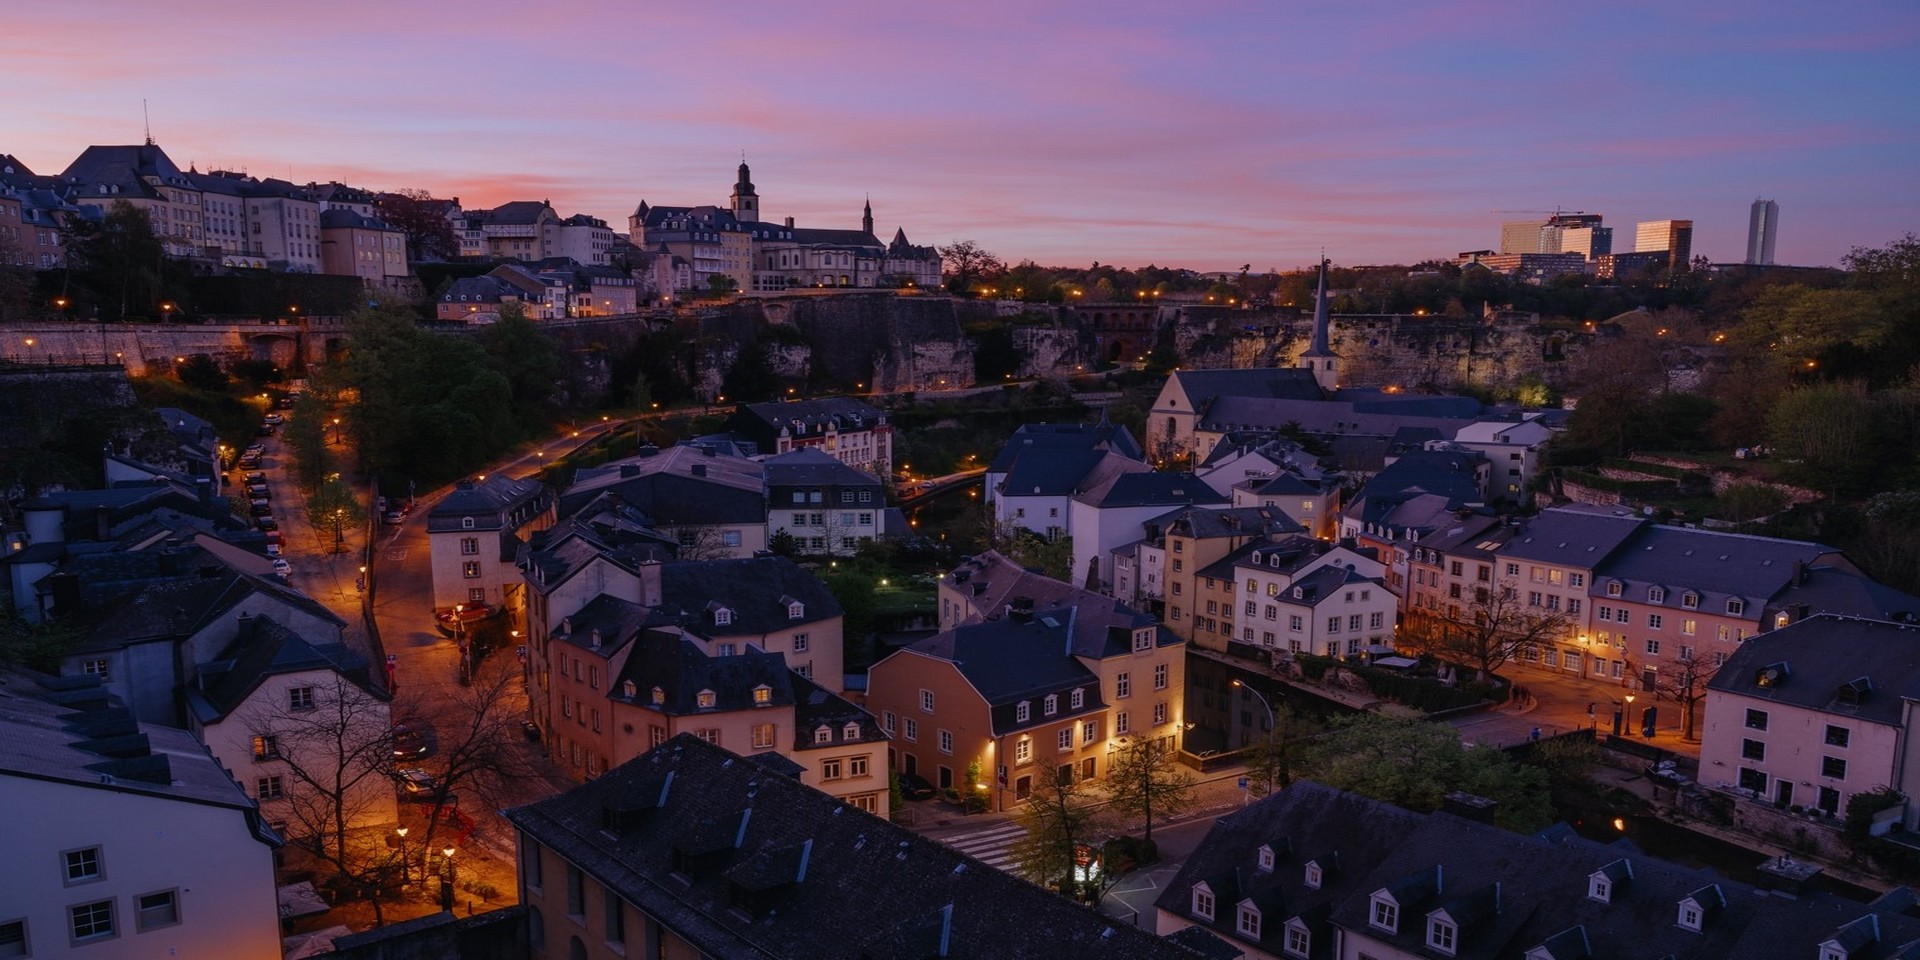 About Luxembourg